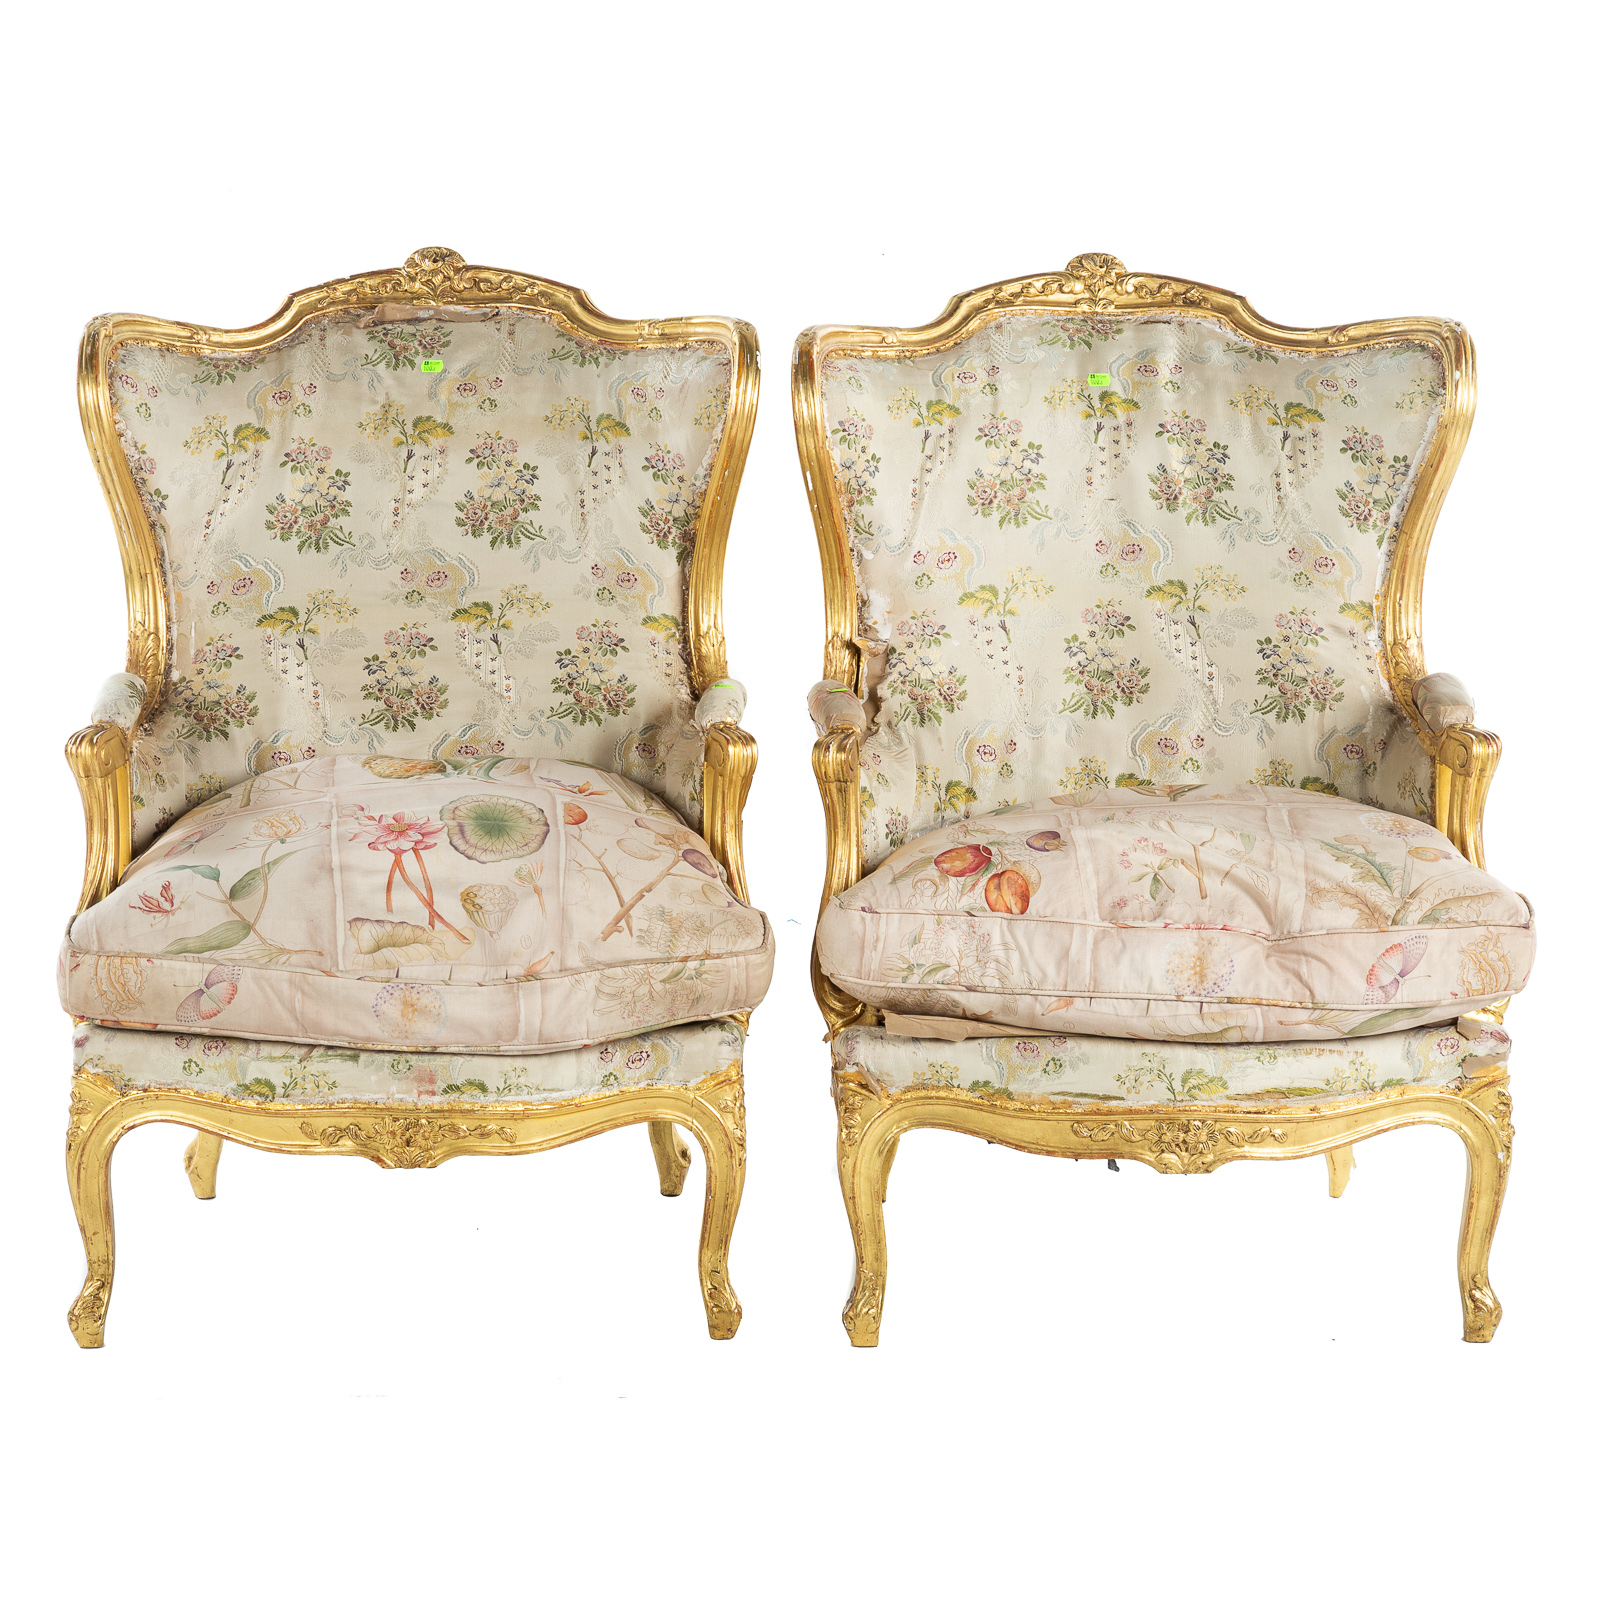 A PAIR OF LOUIS XV STYLE GILTWOOD